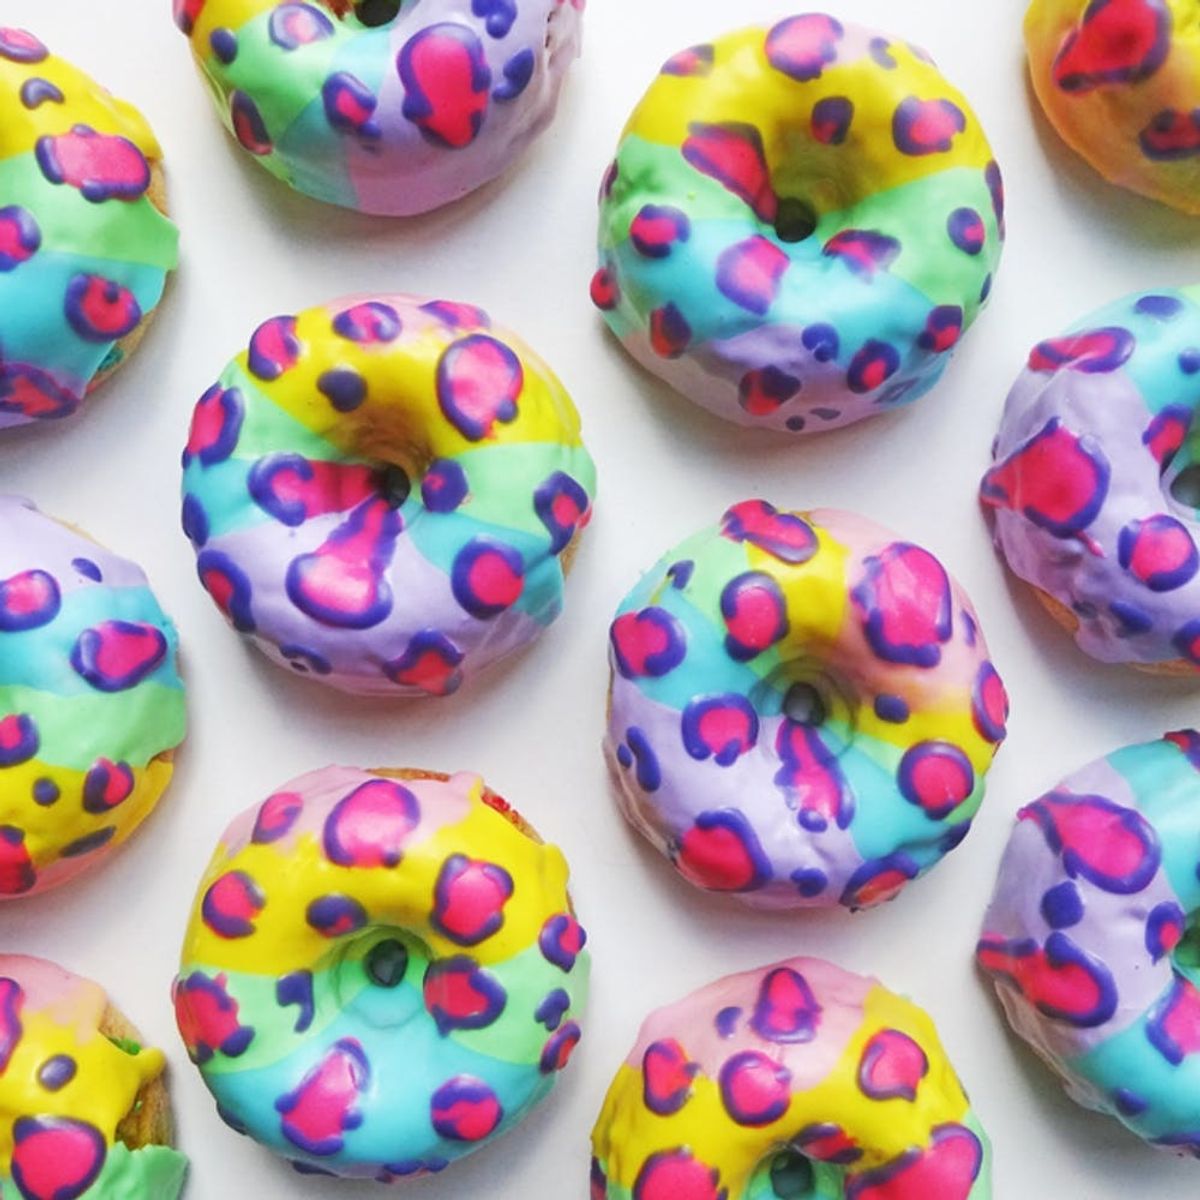 These Lisa Frank-Inspired Leopard Print Donuts Will Make You Go Wild